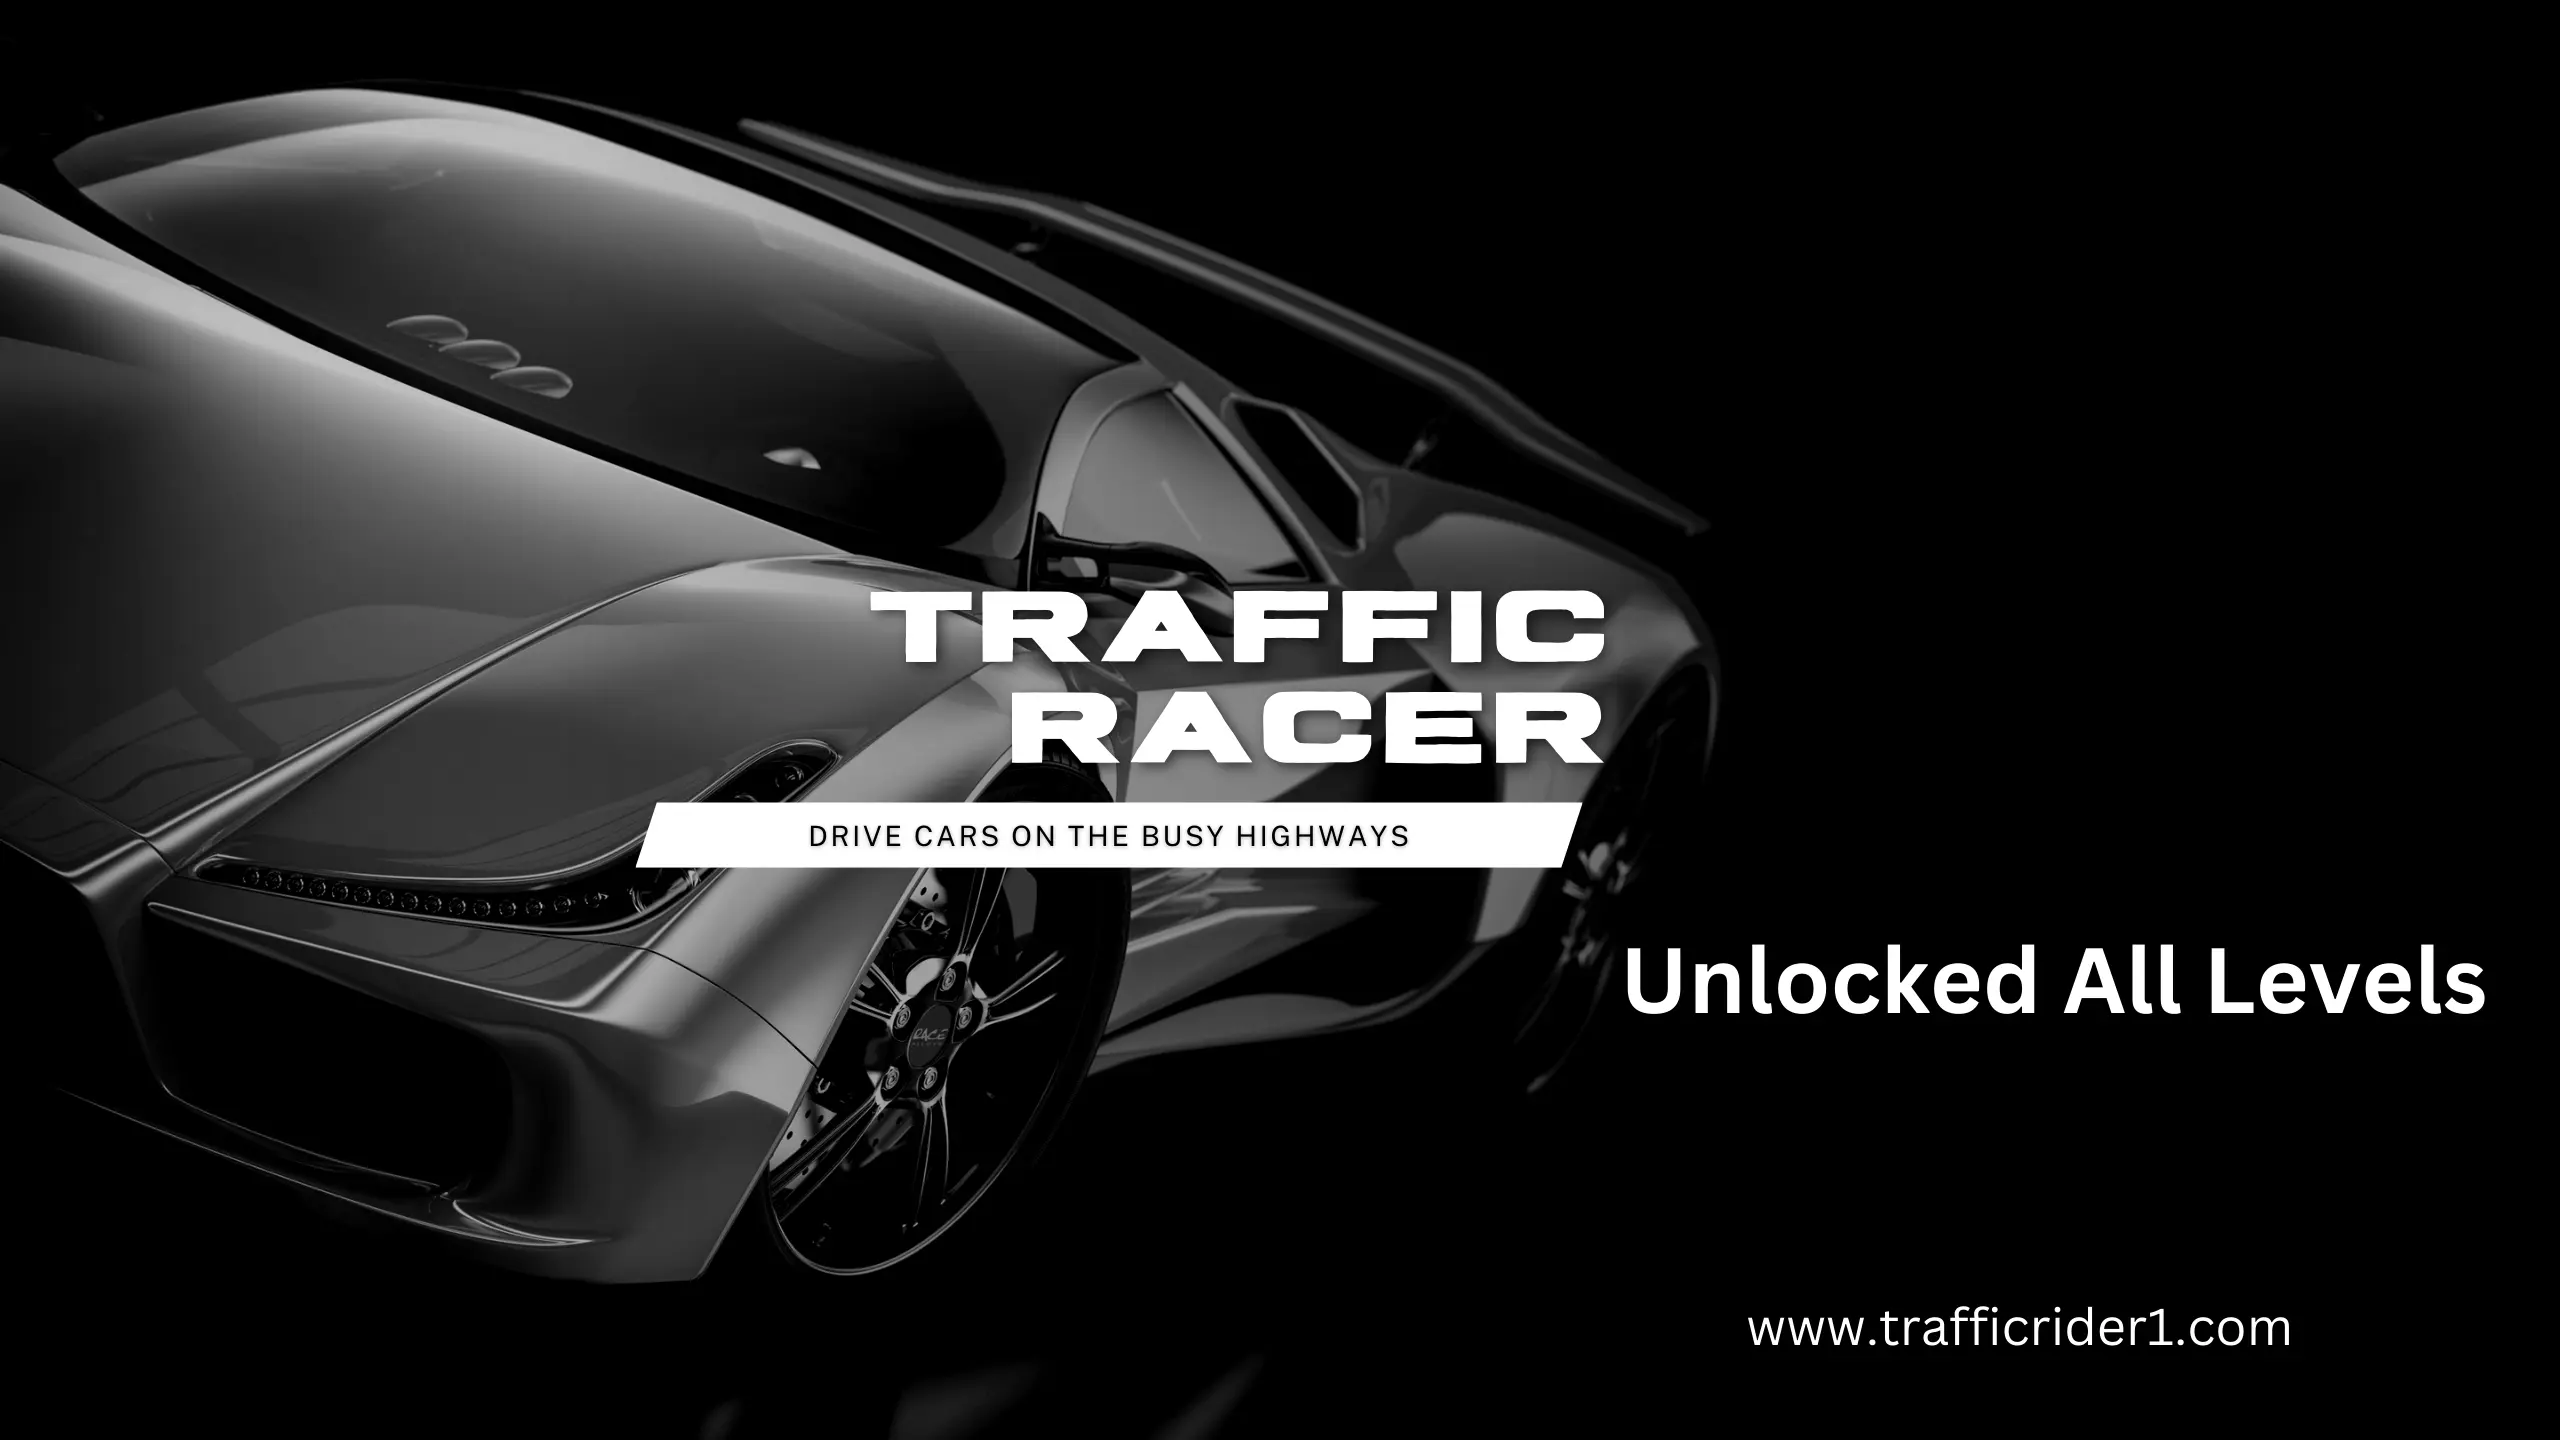 Download Traffic Racer APK for PC